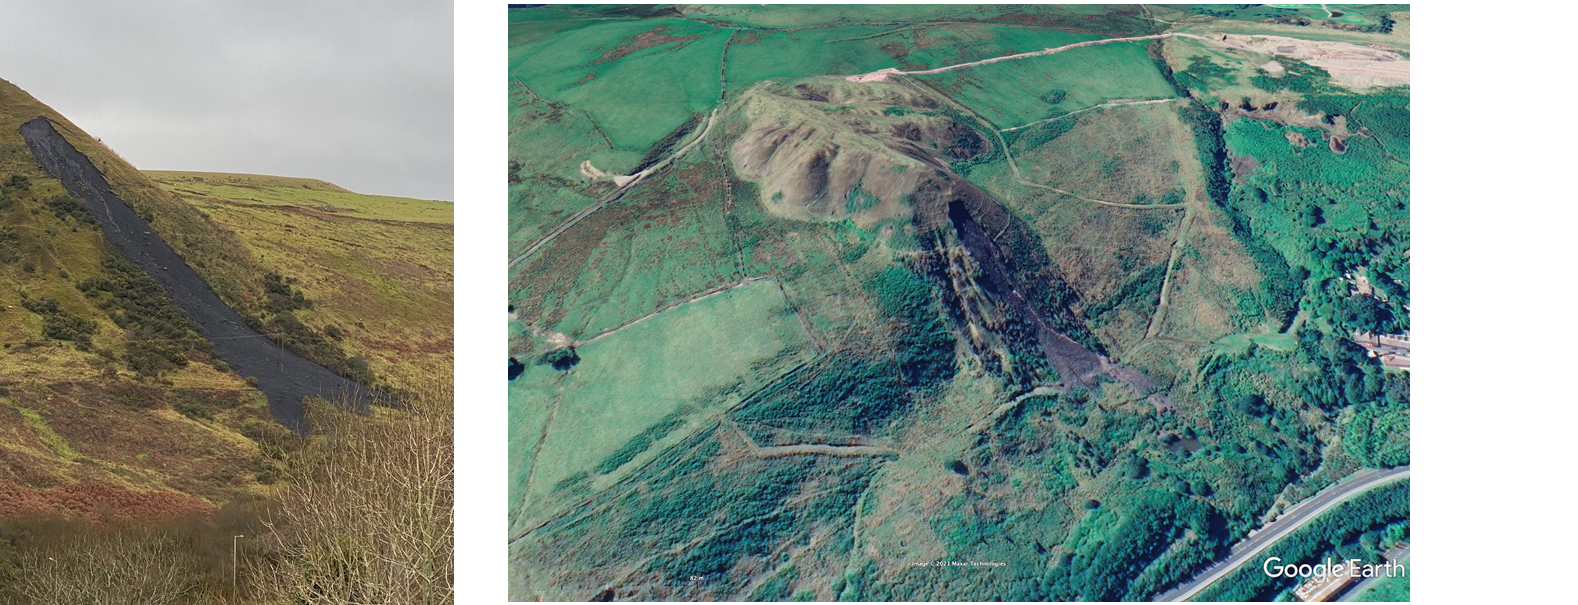 Left - Figure 5 (a): Photograph showing the landslip on 19th December 2020; Right - Figure 5(b) - Google Earth image showing the landslip in September 2021 - 9 months after the event.